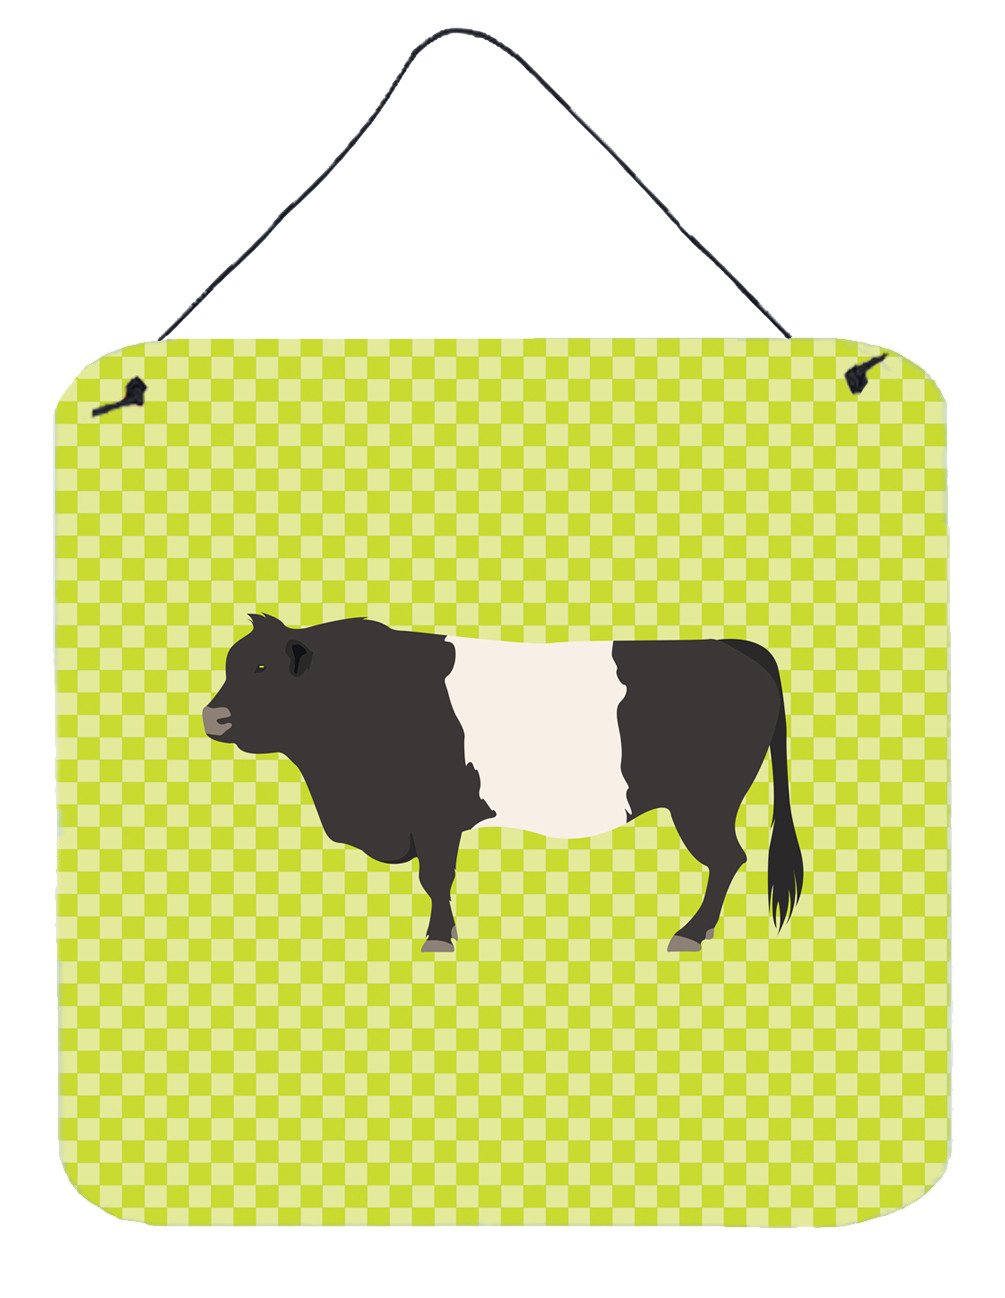 Belted Galloway Cow Green Wall or Door Hanging Prints BB7657DS66 by Caroline's Treasures